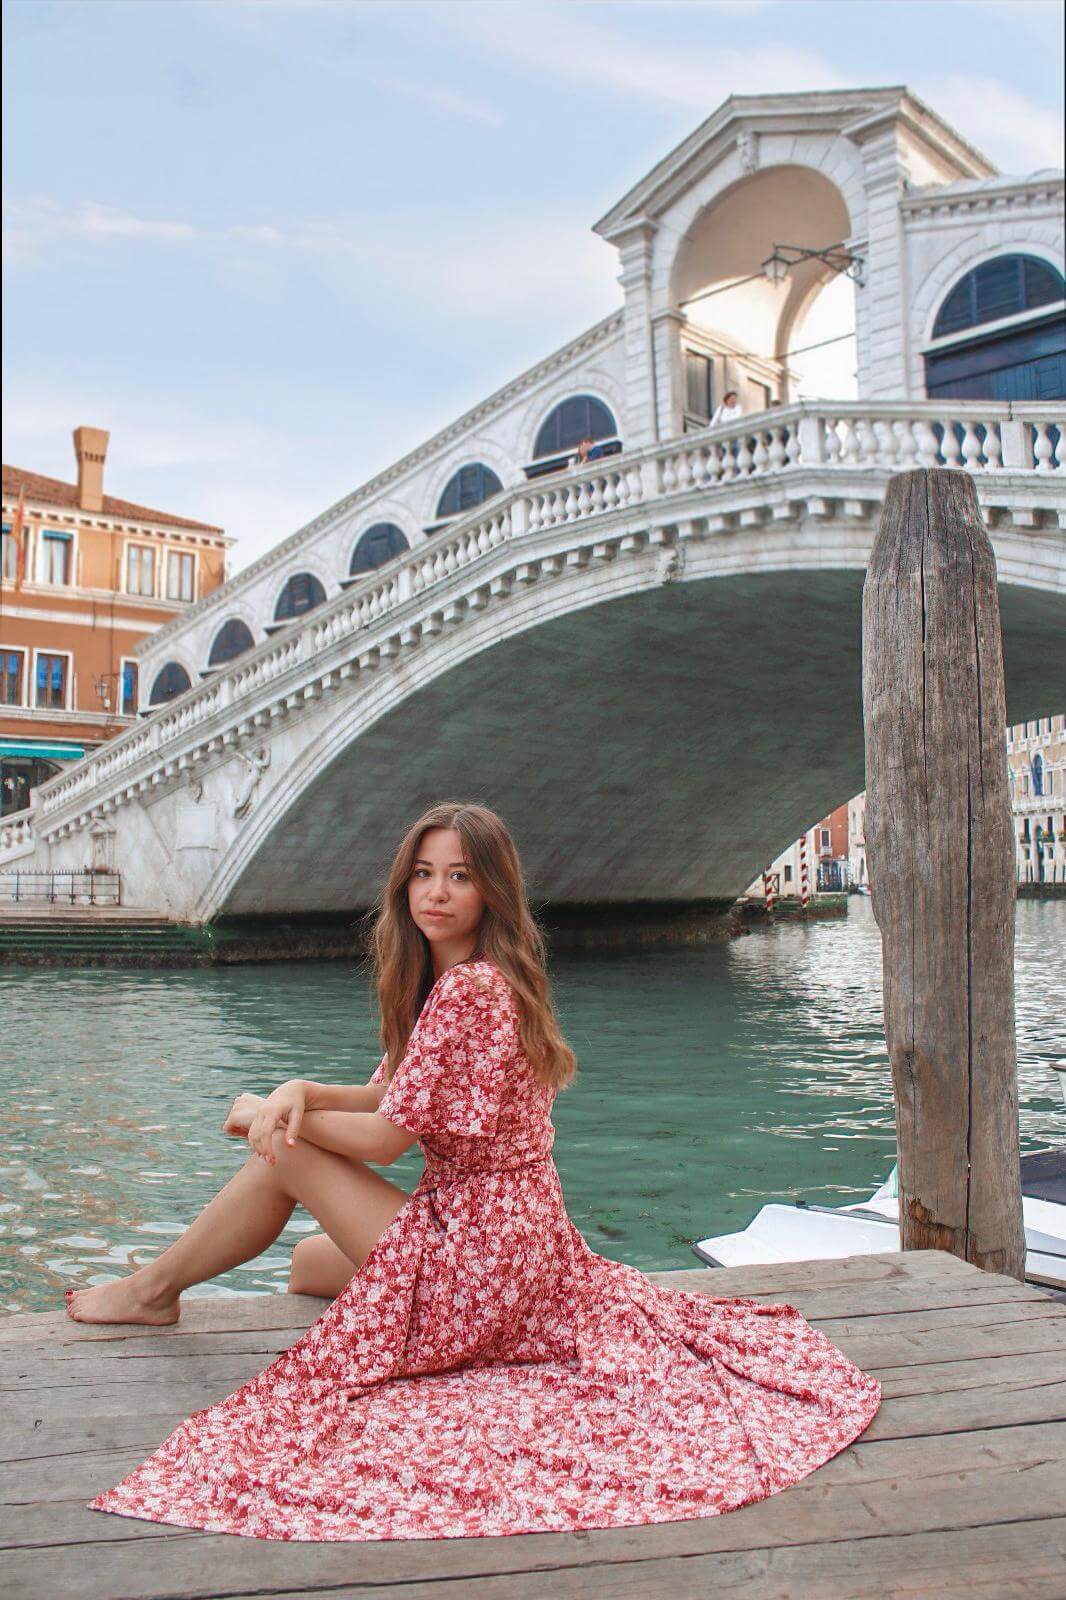 Venice without tourists? Here's how to get the perfect picture at the 5 most beautiful sights in Venice!